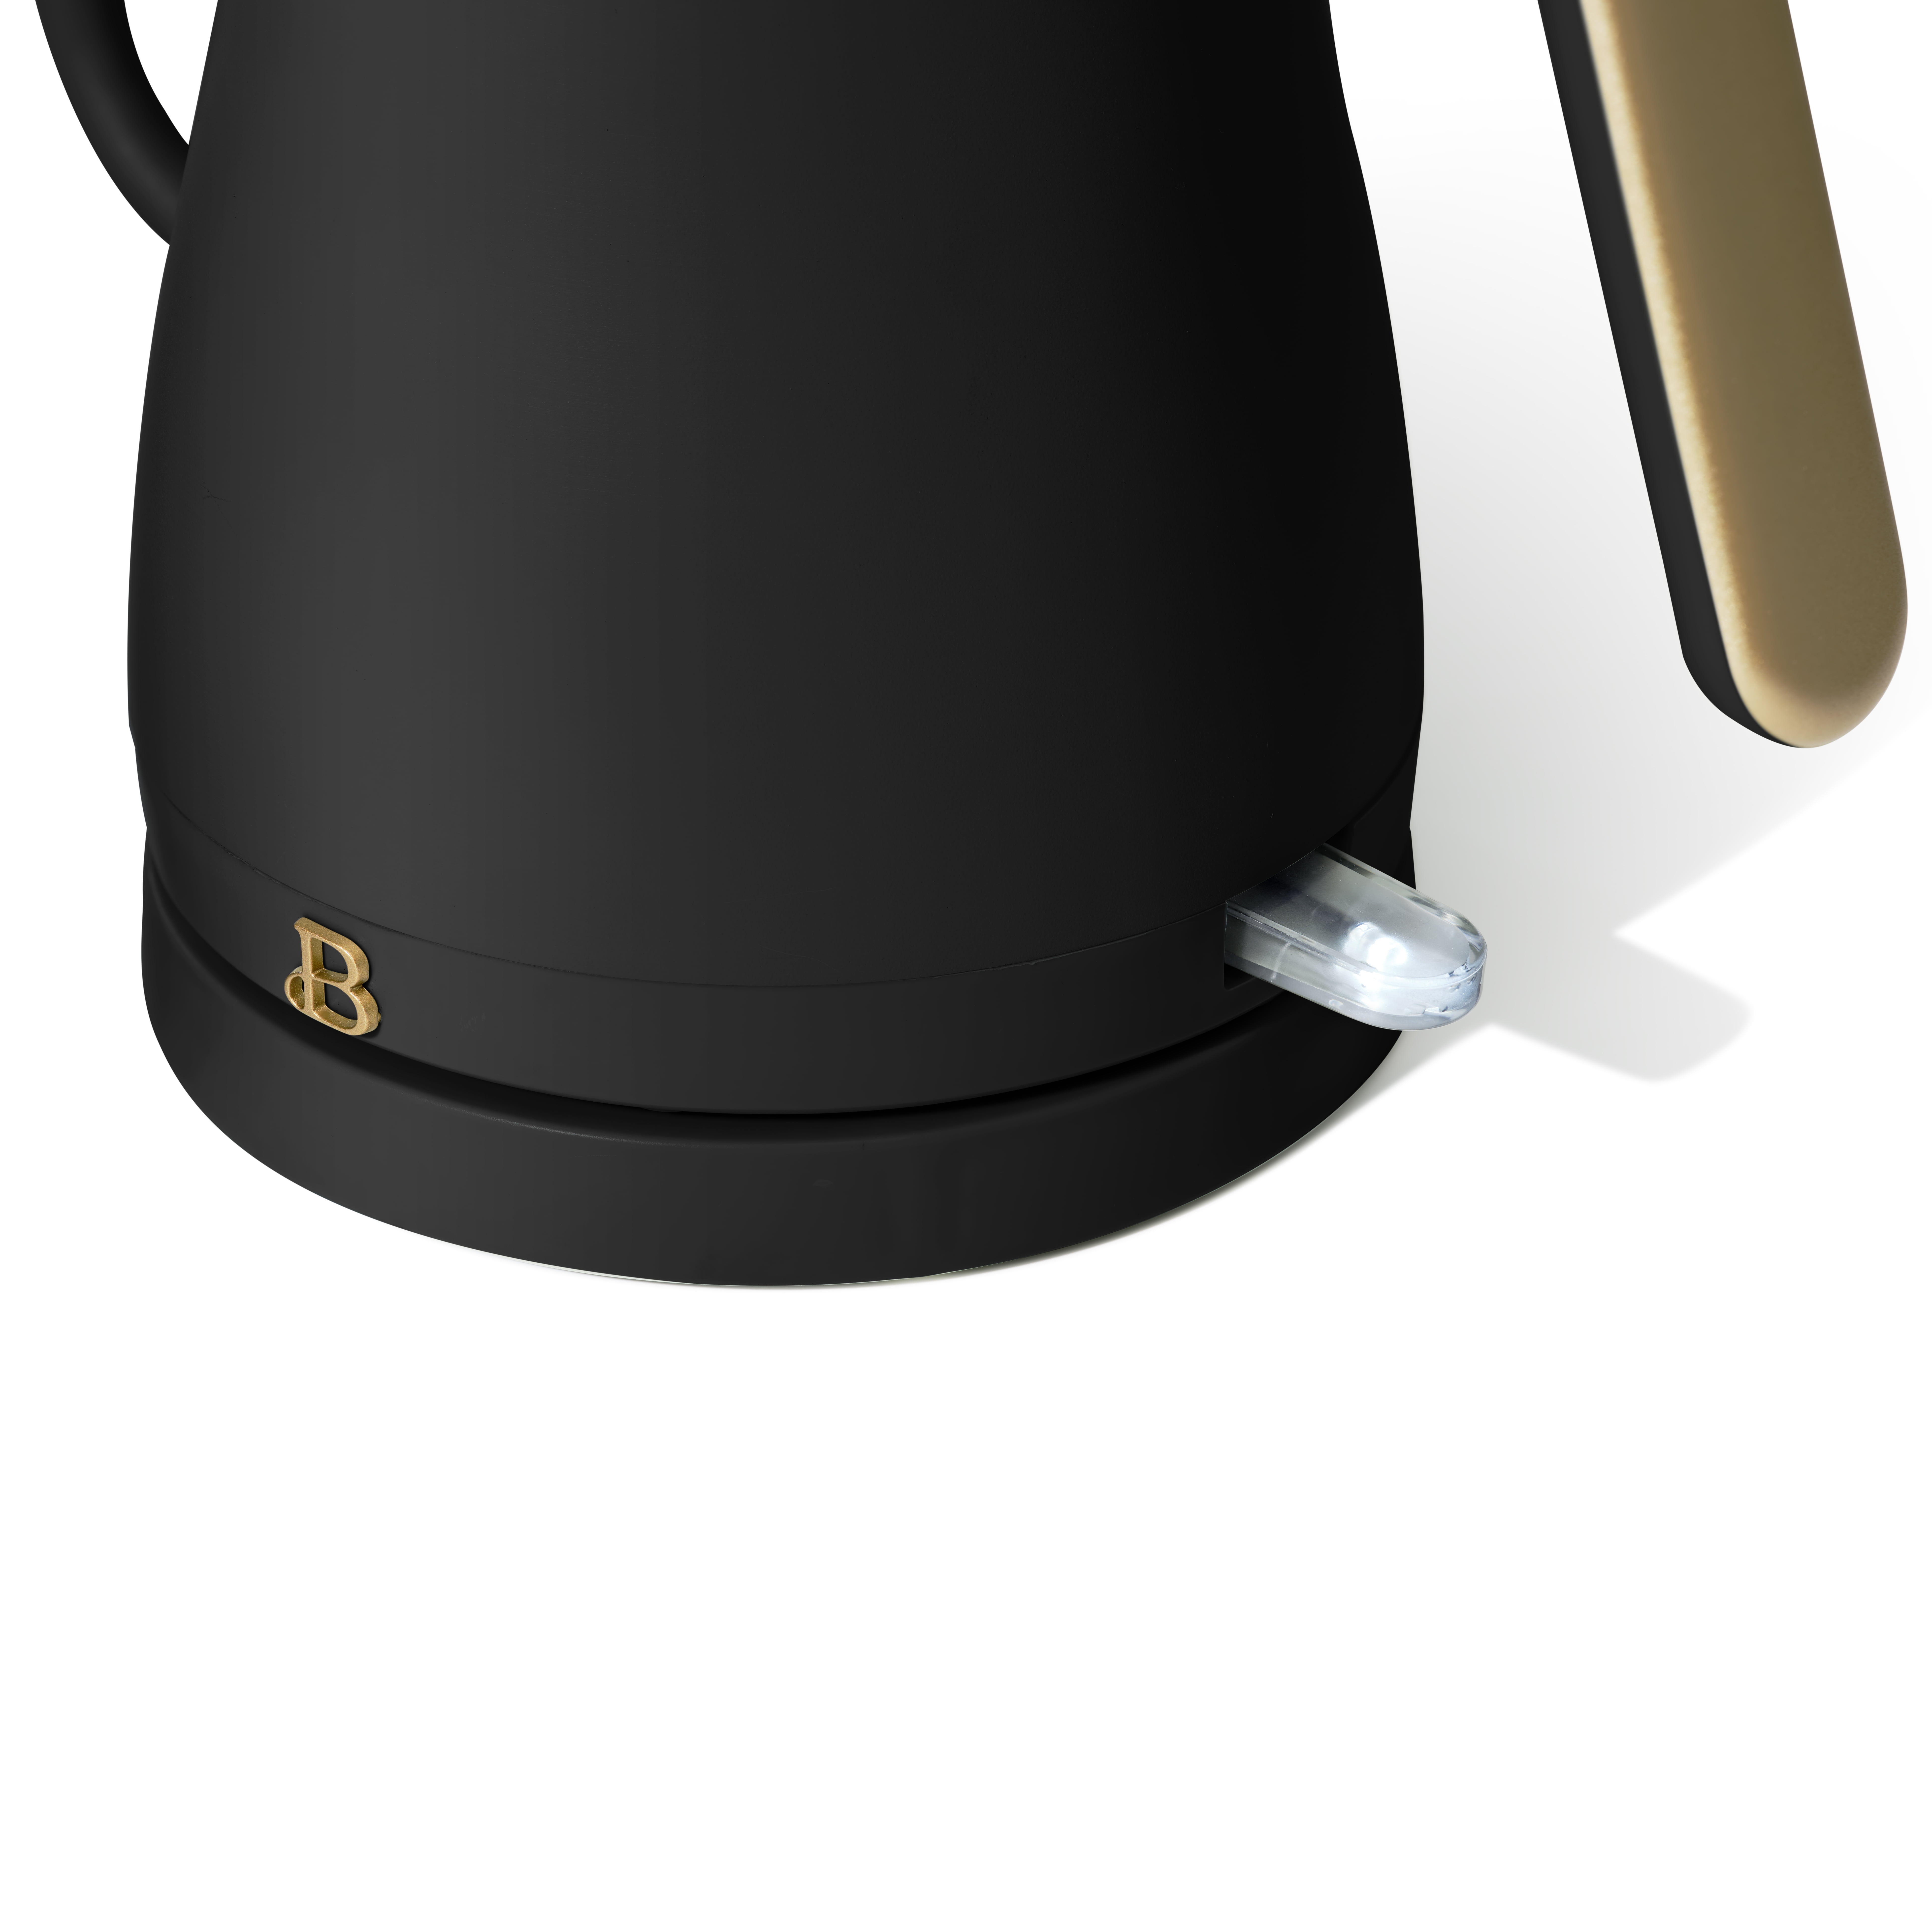 Beautiful 1.7 Liter One Touch Electric Kettle Black Sesame by Drew Barrymore